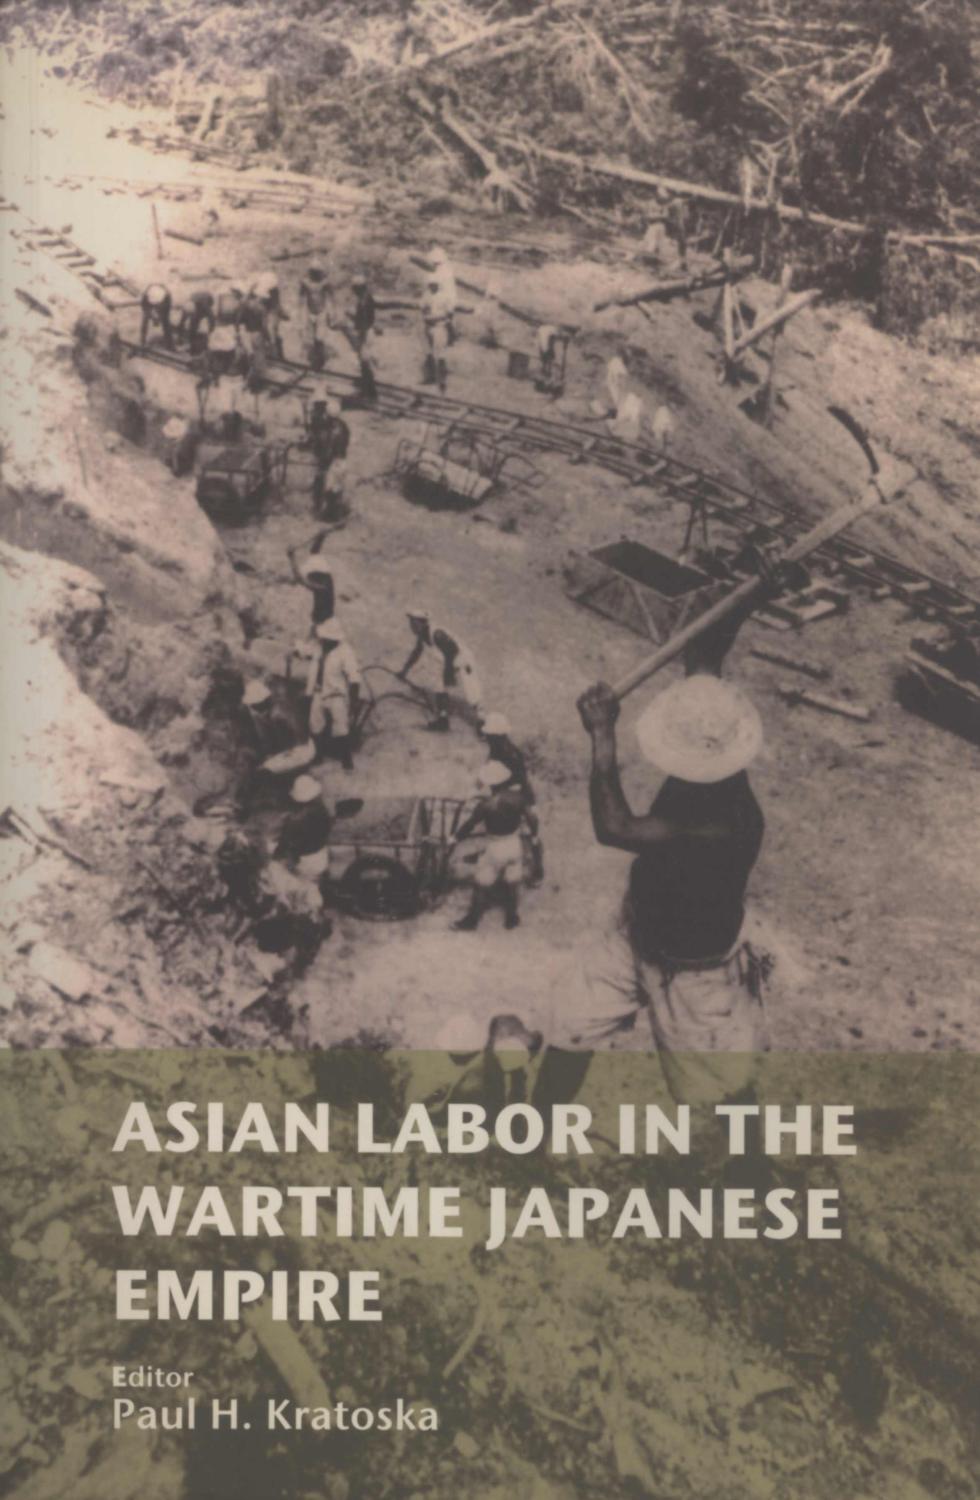 Asian Labor in the Wartime Japanese Empire: Unknown Histories - Paul H. Kratoska (editor)